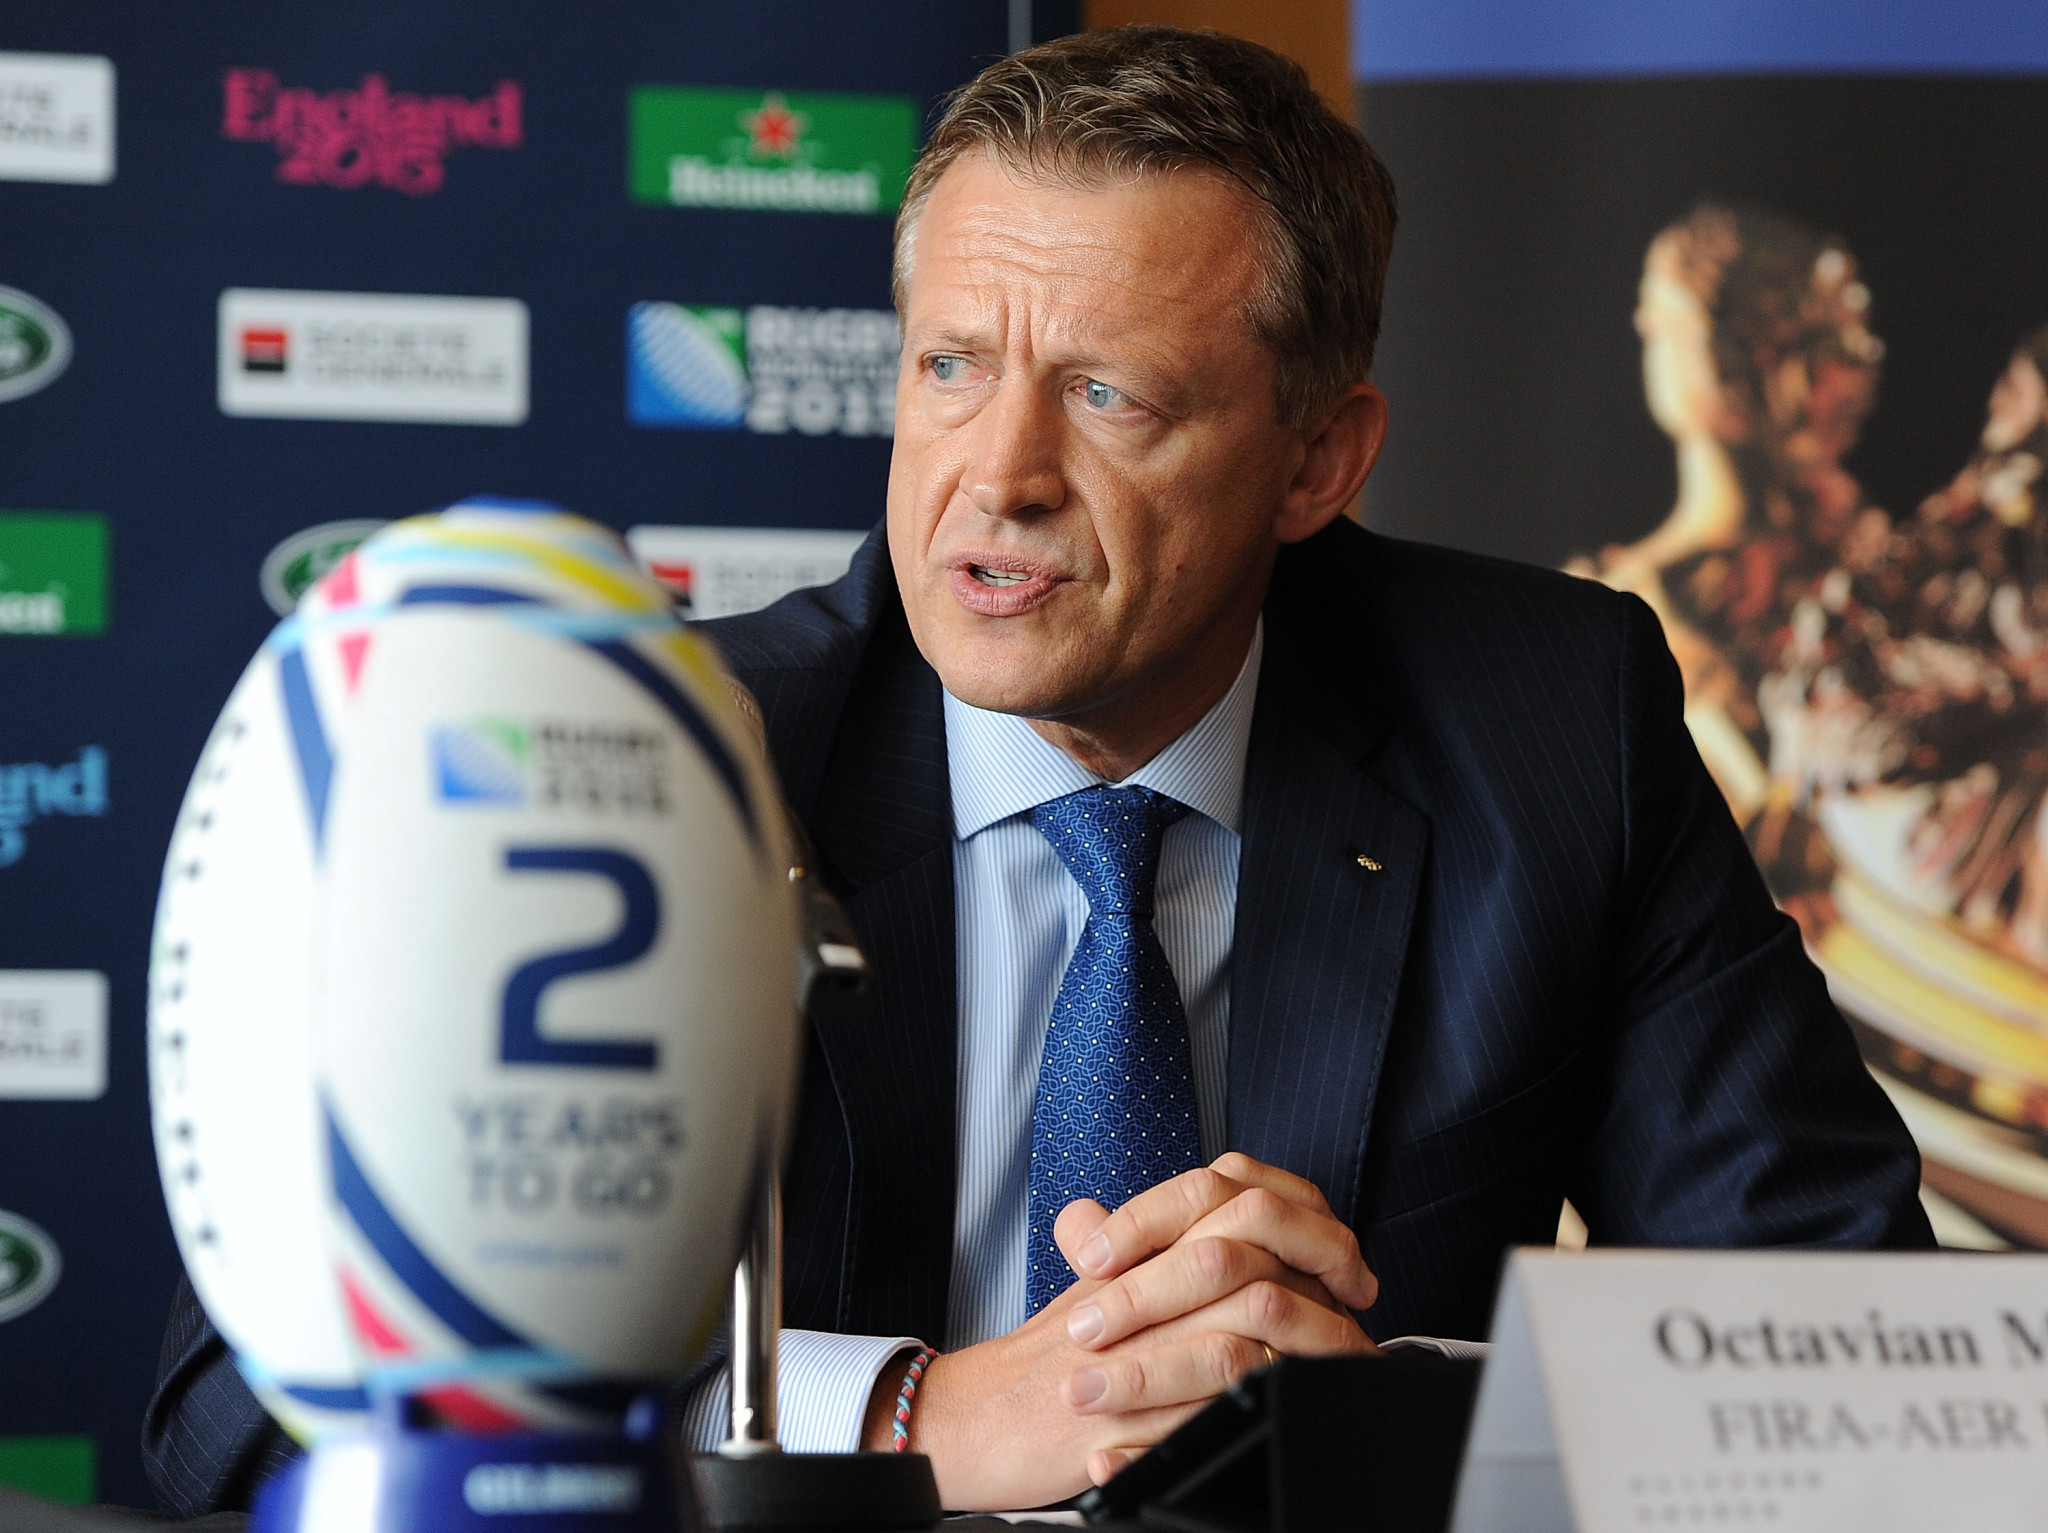 Octavian Morariu has been President of Rugby Europe since 2013 ©Getty Images